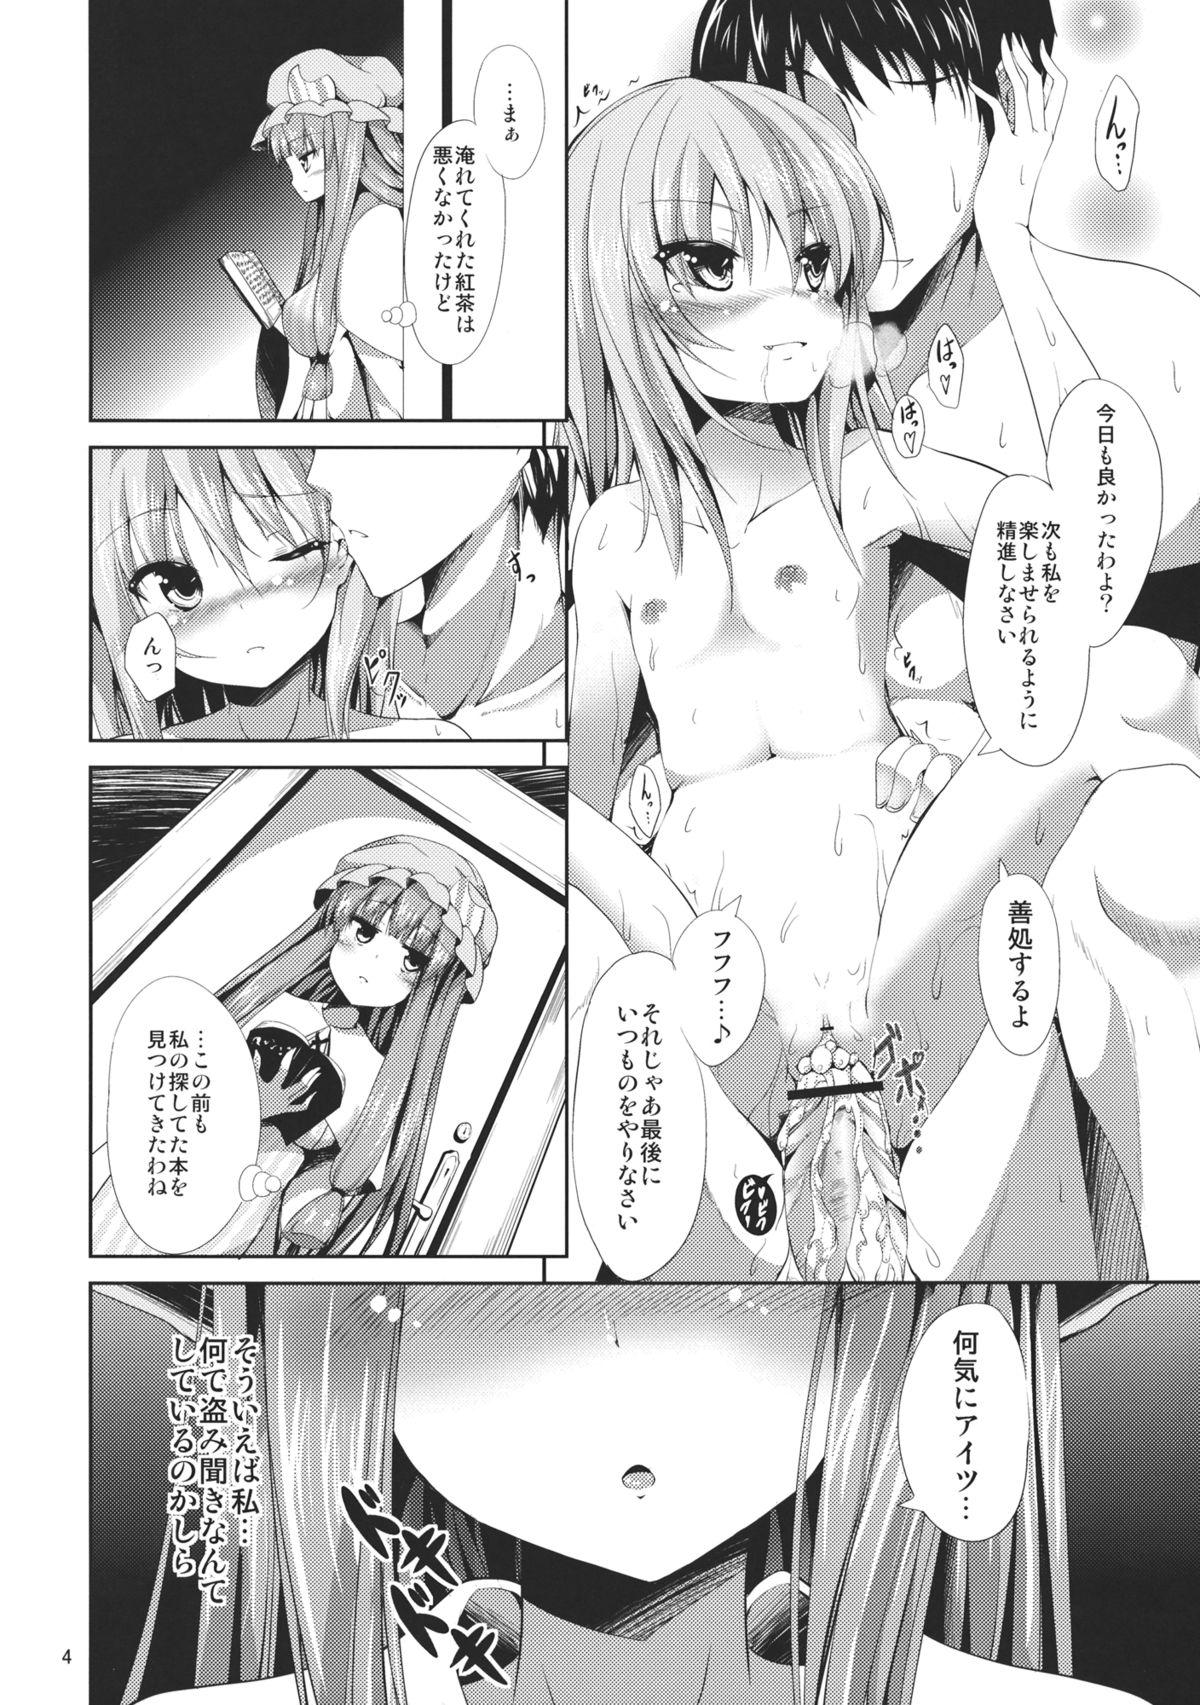 Korean Sweet nothingS - Touhou project Pov Sex - Page 4